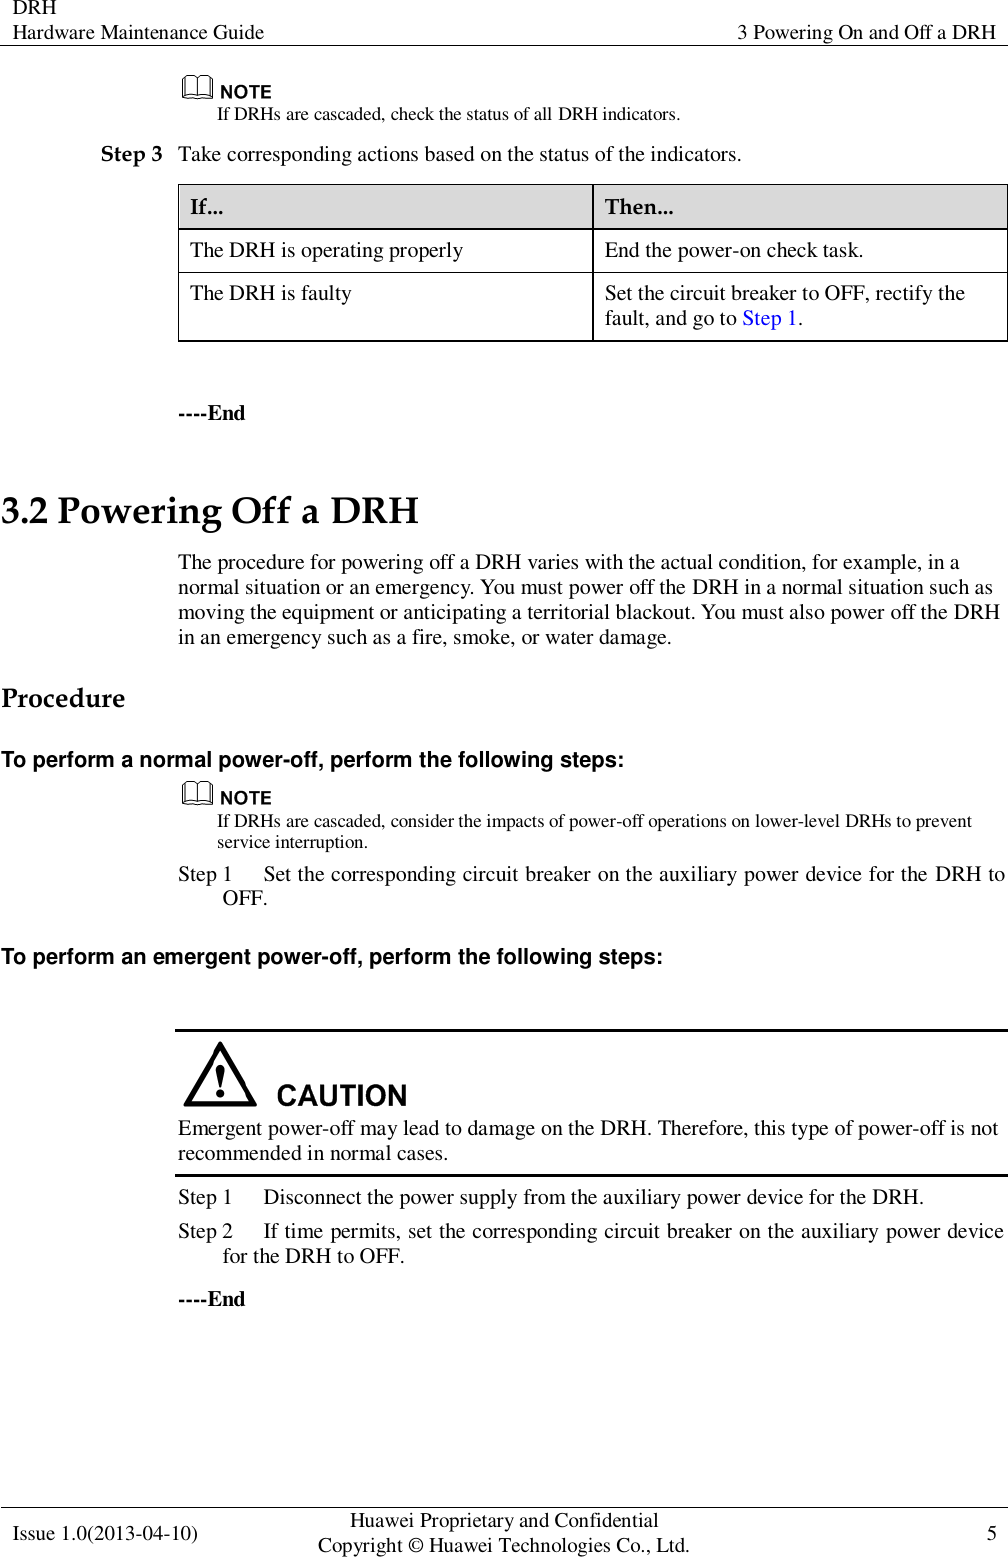  DRH Hardware Maintenance Guide   3 Powering On and Off a DRH  Issue 1.0(2013-04-10) Huawei Proprietary and Confidential                                     Copyright © Huawei Technologies Co., Ltd. 5     If DRHs are cascaded, check the status of all DRH indicators. Step 3 Take corresponding actions based on the status of the indicators. If... Then... The DRH is operating properly End the power-on check task. The DRH is faulty Set the circuit breaker to OFF, rectify the fault, and go to Step 1.  ----End 3.2 Powering Off a DRH The procedure for powering off a DRH varies with the actual condition, for example, in a normal situation or an emergency. You must power off the DRH in a normal situation such as moving the equipment or anticipating a territorial blackout. You must also power off the DRH in an emergency such as a fire, smoke, or water damage. Procedure To perform a normal power-off, perform the following steps:  If DRHs are cascaded, consider the impacts of power-off operations on lower-level DRHs to prevent service interruption.   Step 1 Set the corresponding circuit breaker on the auxiliary power device for the DRH to OFF. To perform an emergent power-off, perform the following steps:   Emergent power-off may lead to damage on the DRH. Therefore, this type of power-off is not recommended in normal cases. Step 1 Disconnect the power supply from the auxiliary power device for the DRH. Step 2 If time permits, set the corresponding circuit breaker on the auxiliary power device for the DRH to OFF. ----End 